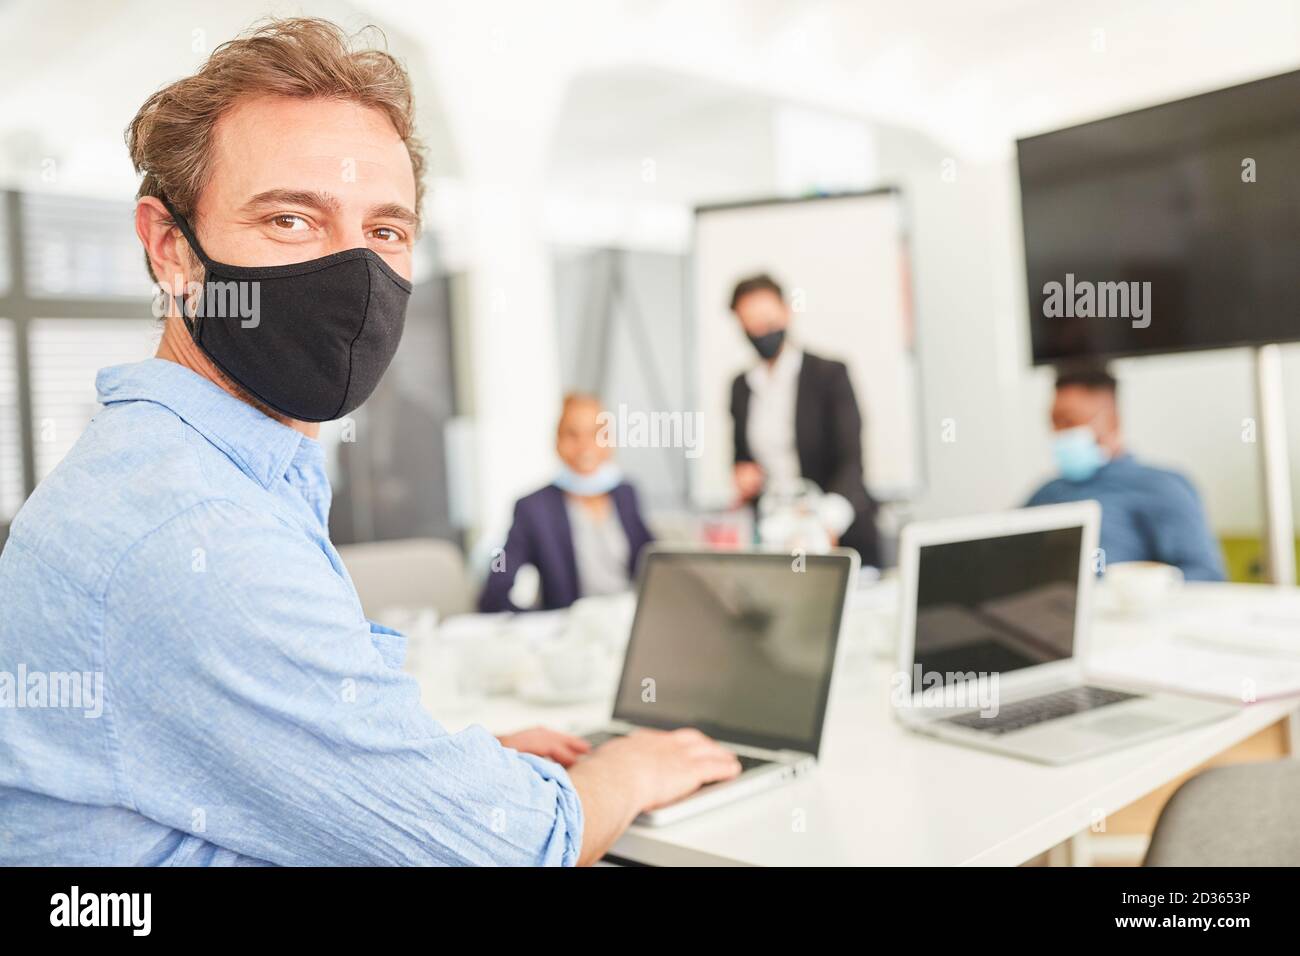 Business man with face mask works or researches on laptop computer Stock Photo